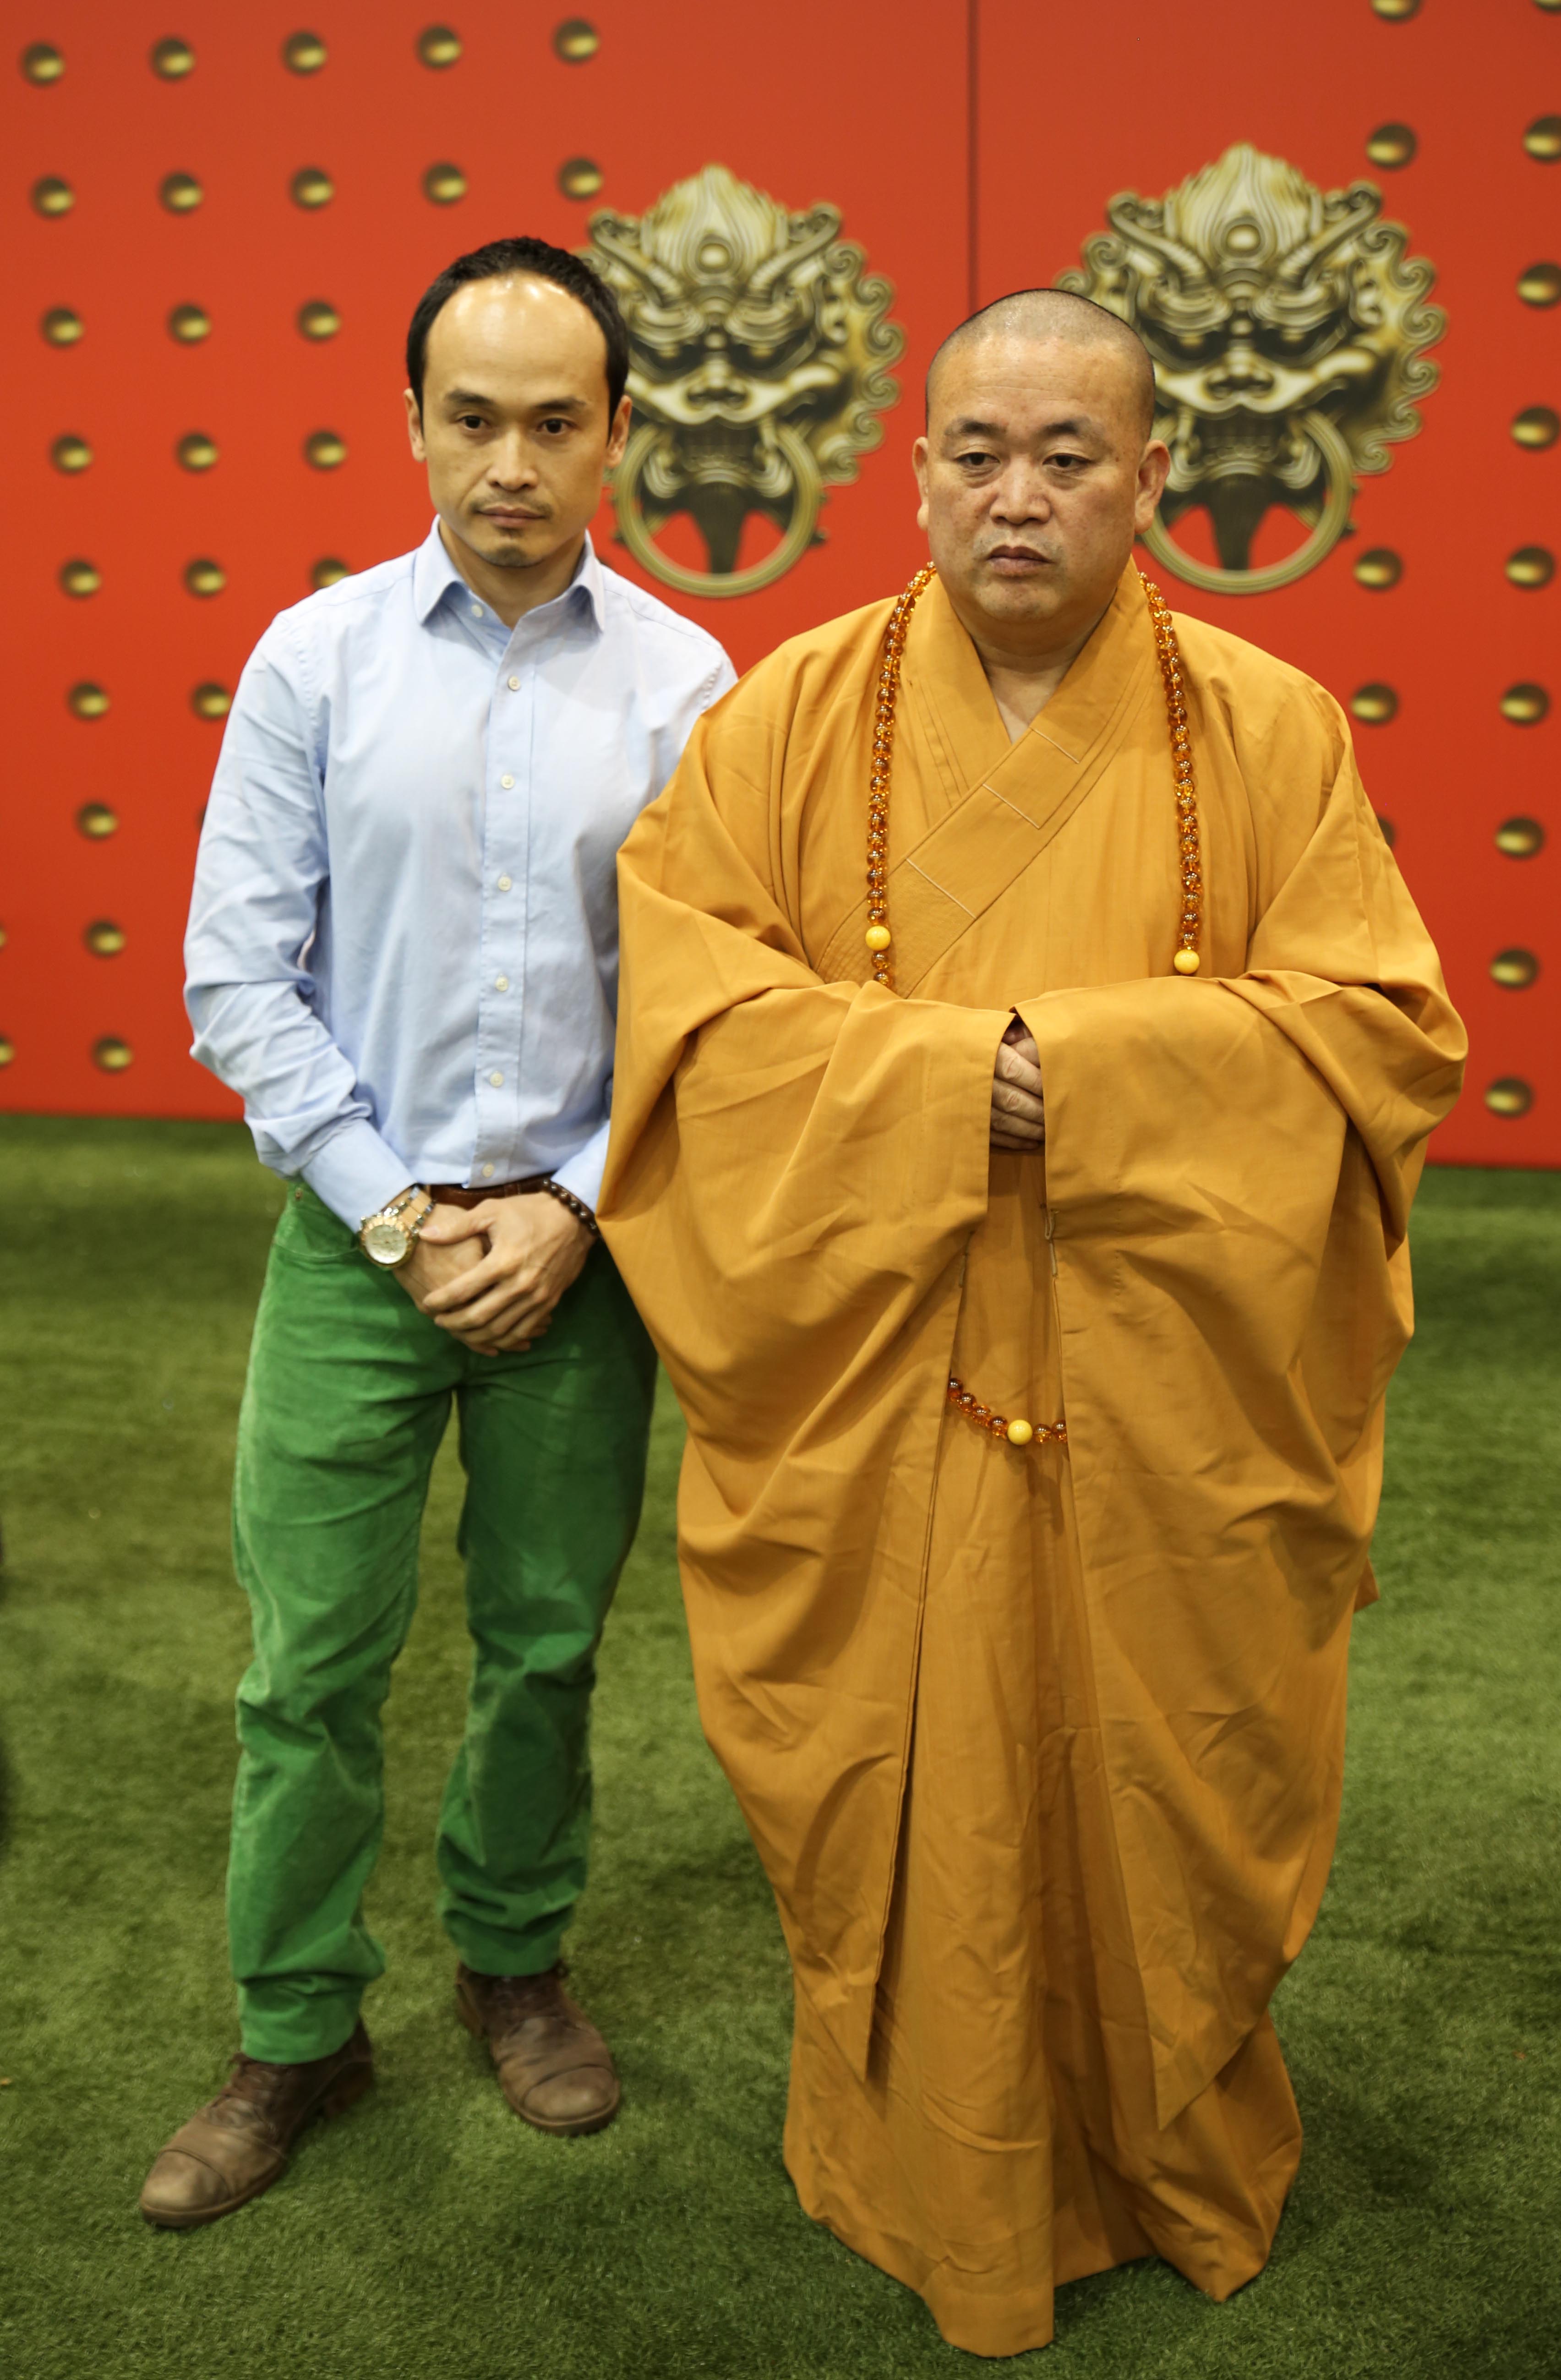 Still of Jason Ninh Cao with the Shaolin Abbot Shi Yong Xin at the Shaolin Cultural Festival in London.